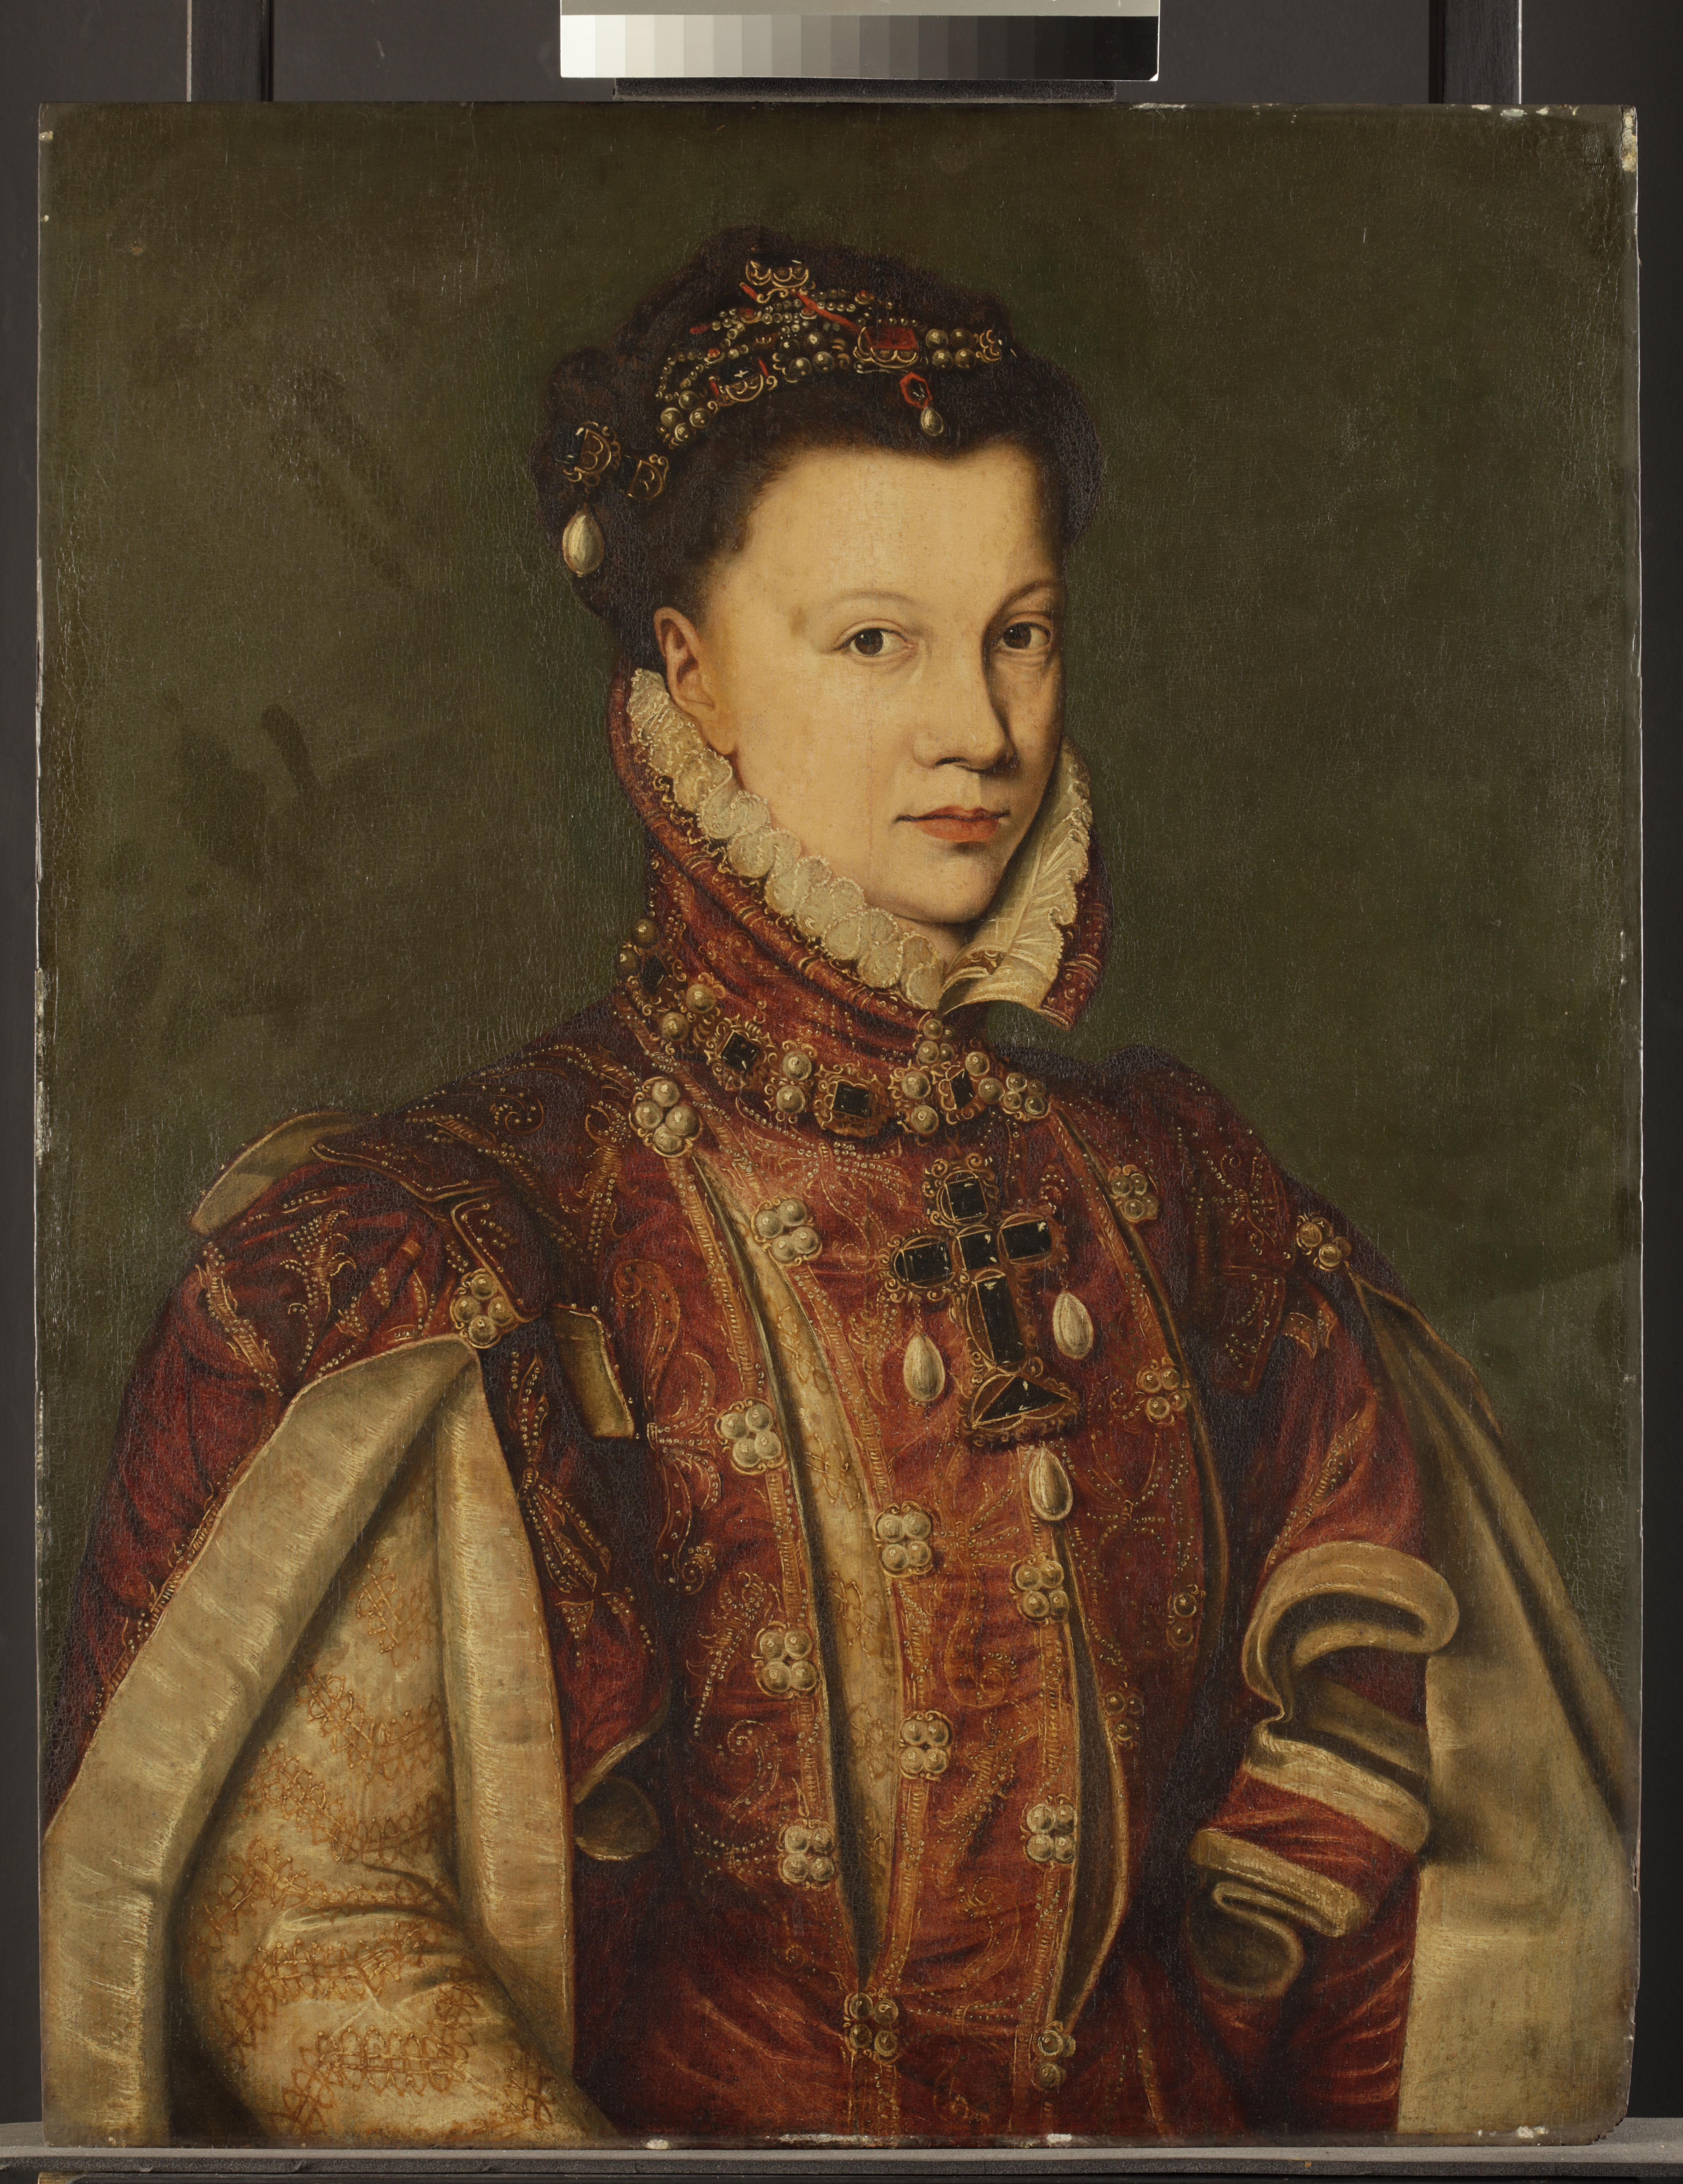 Fig. 1. Portrait of Elisabeth de Valois, copy after Anthonis Mor by unknown artist, late 16th century, Fitzwilliam Museum. (© Titmus)